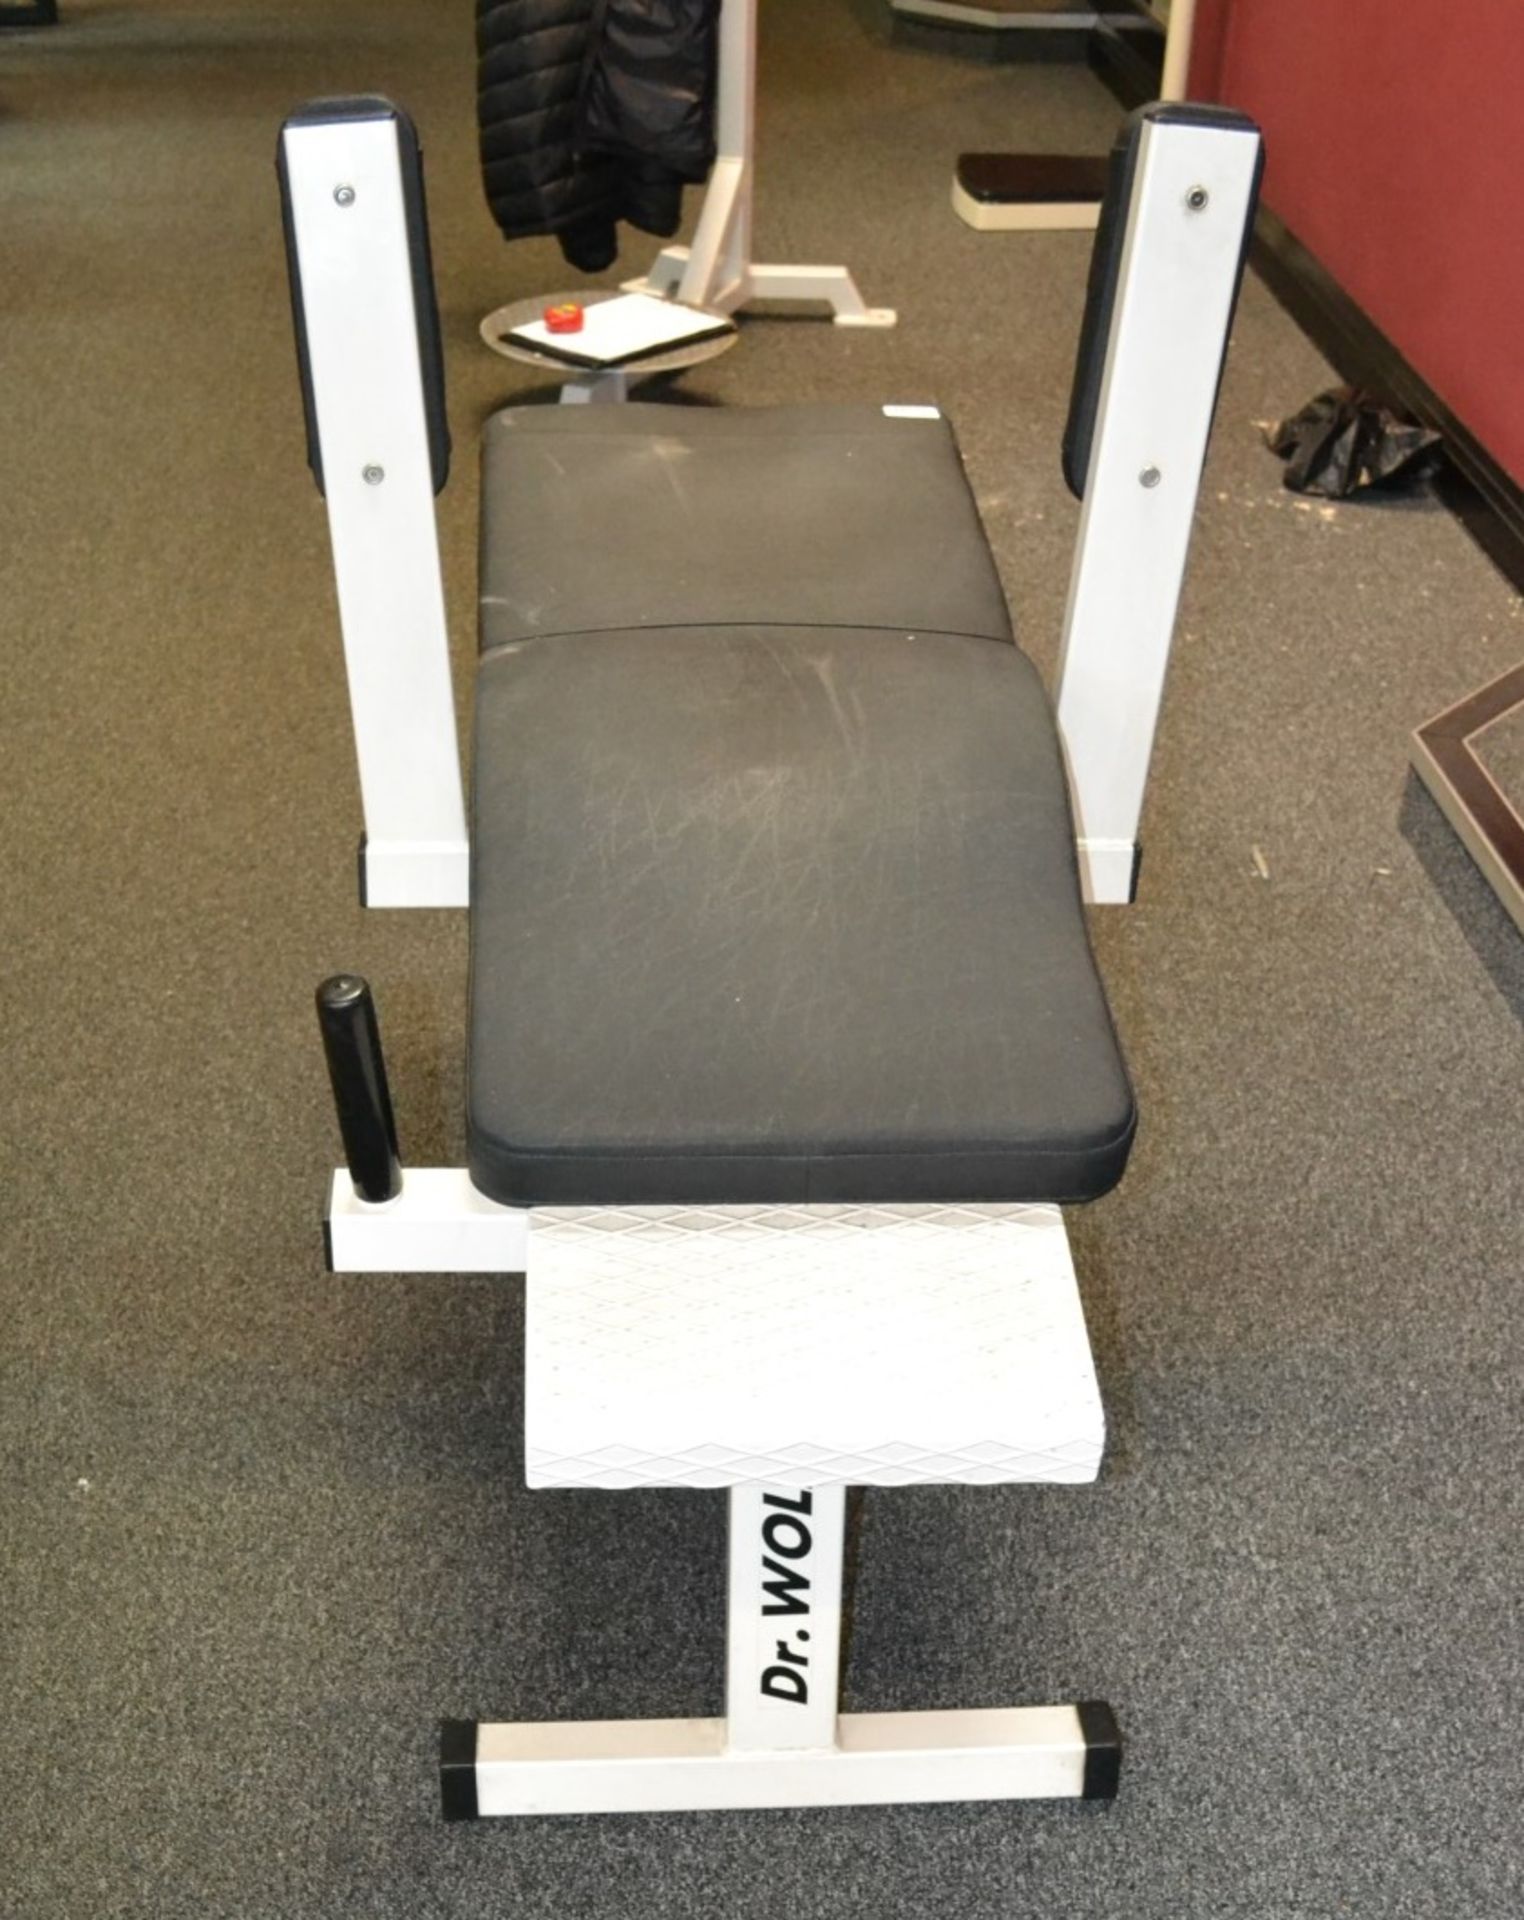 1 x Dr.Wolff Abdominal Fitness Bench - Dimensions: L140 x H100 x W50cm - Ref: J2070/1FG - CL356 - - Image 3 of 3